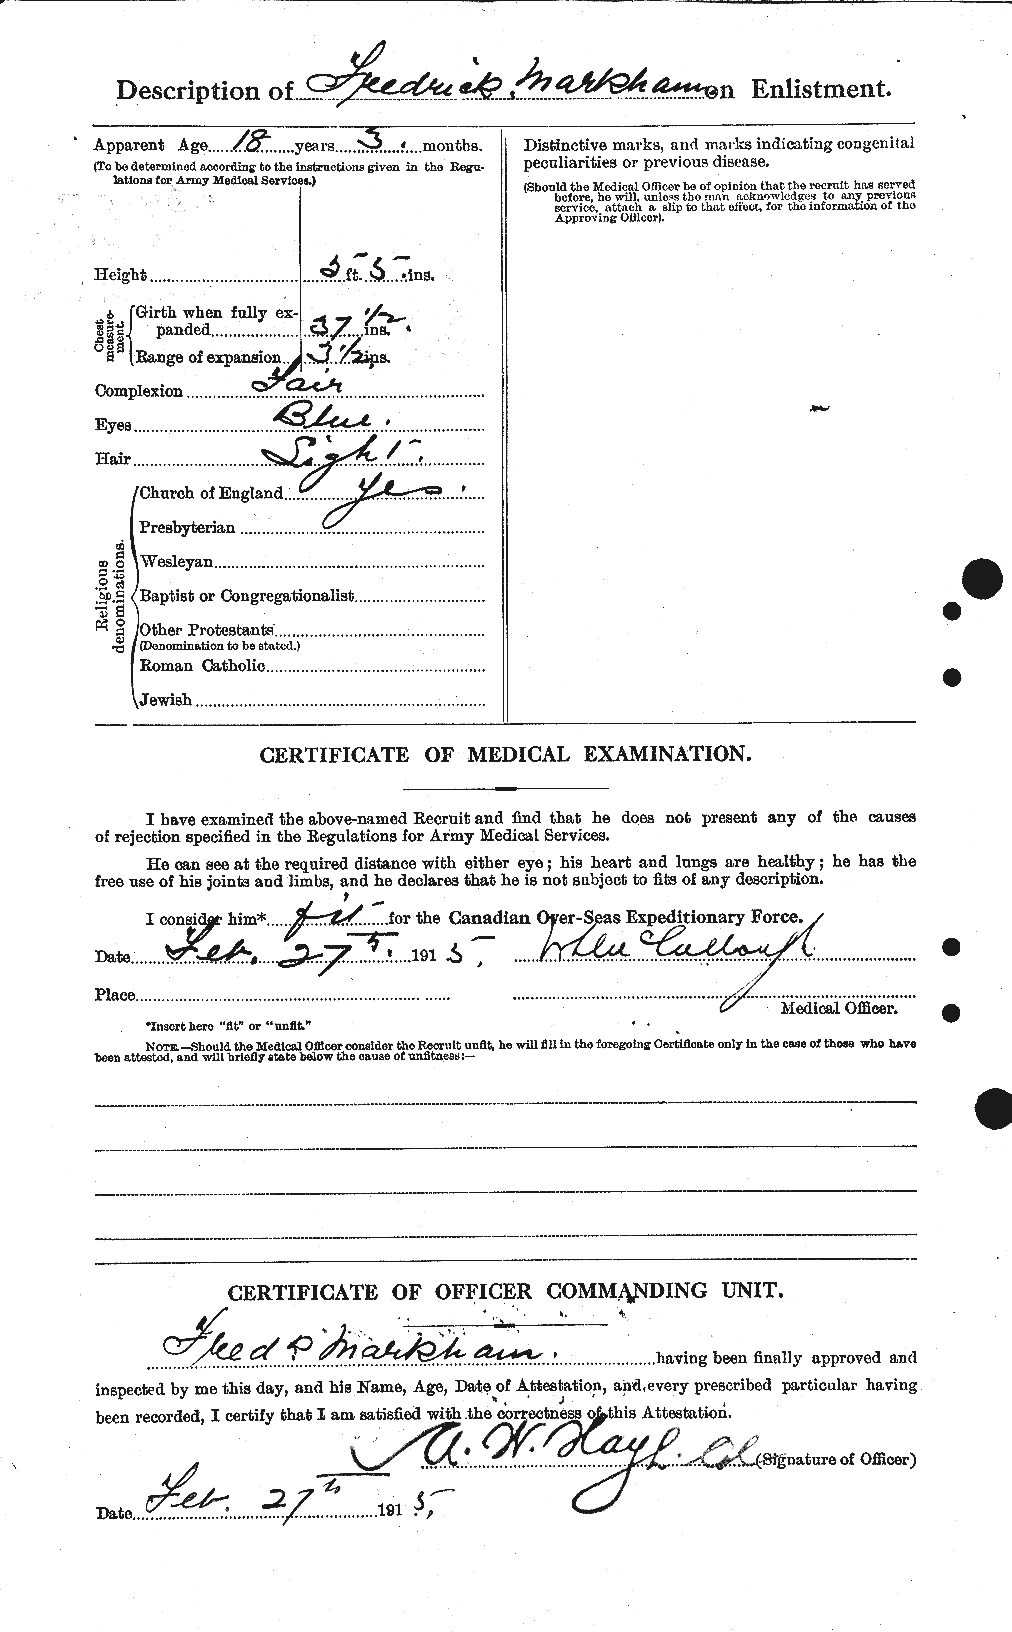 Personnel Records of the First World War - CEF 479212b